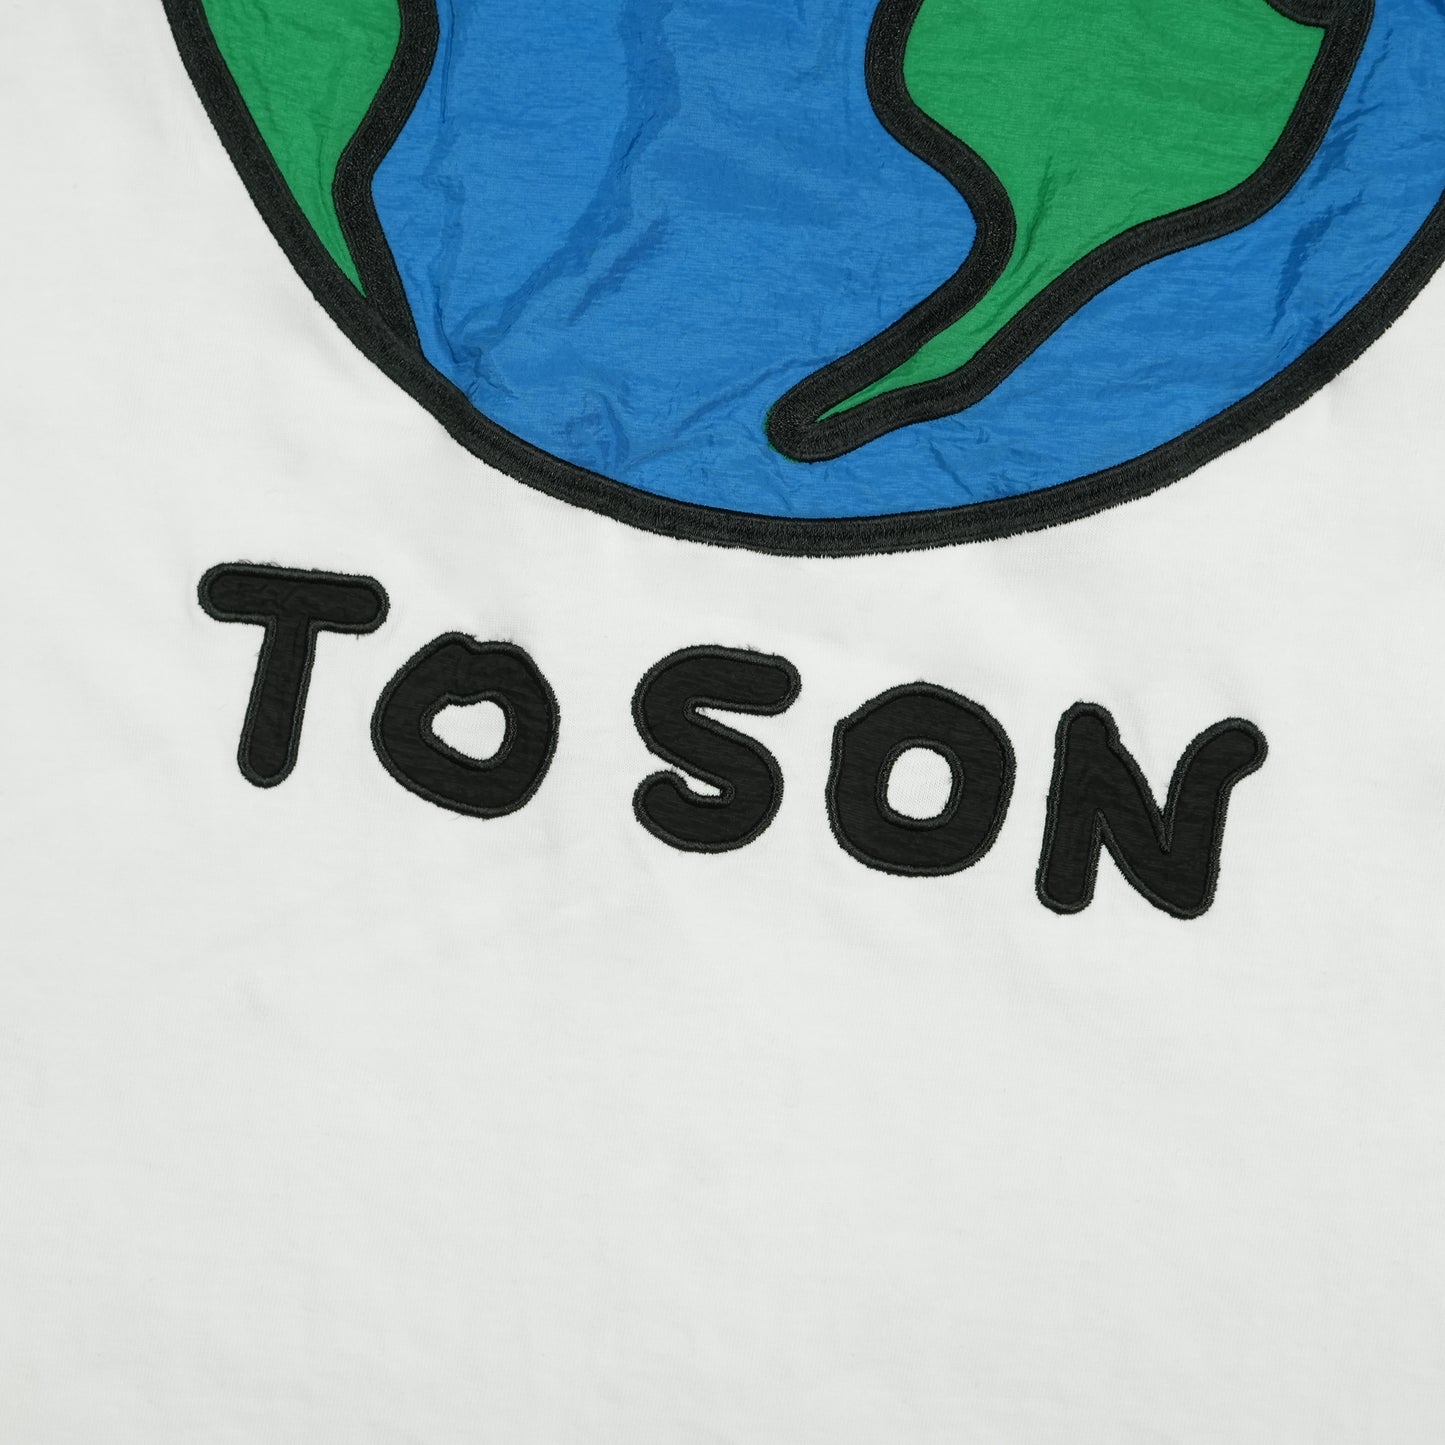 Toson, "Earth" Patchwork T-shirt